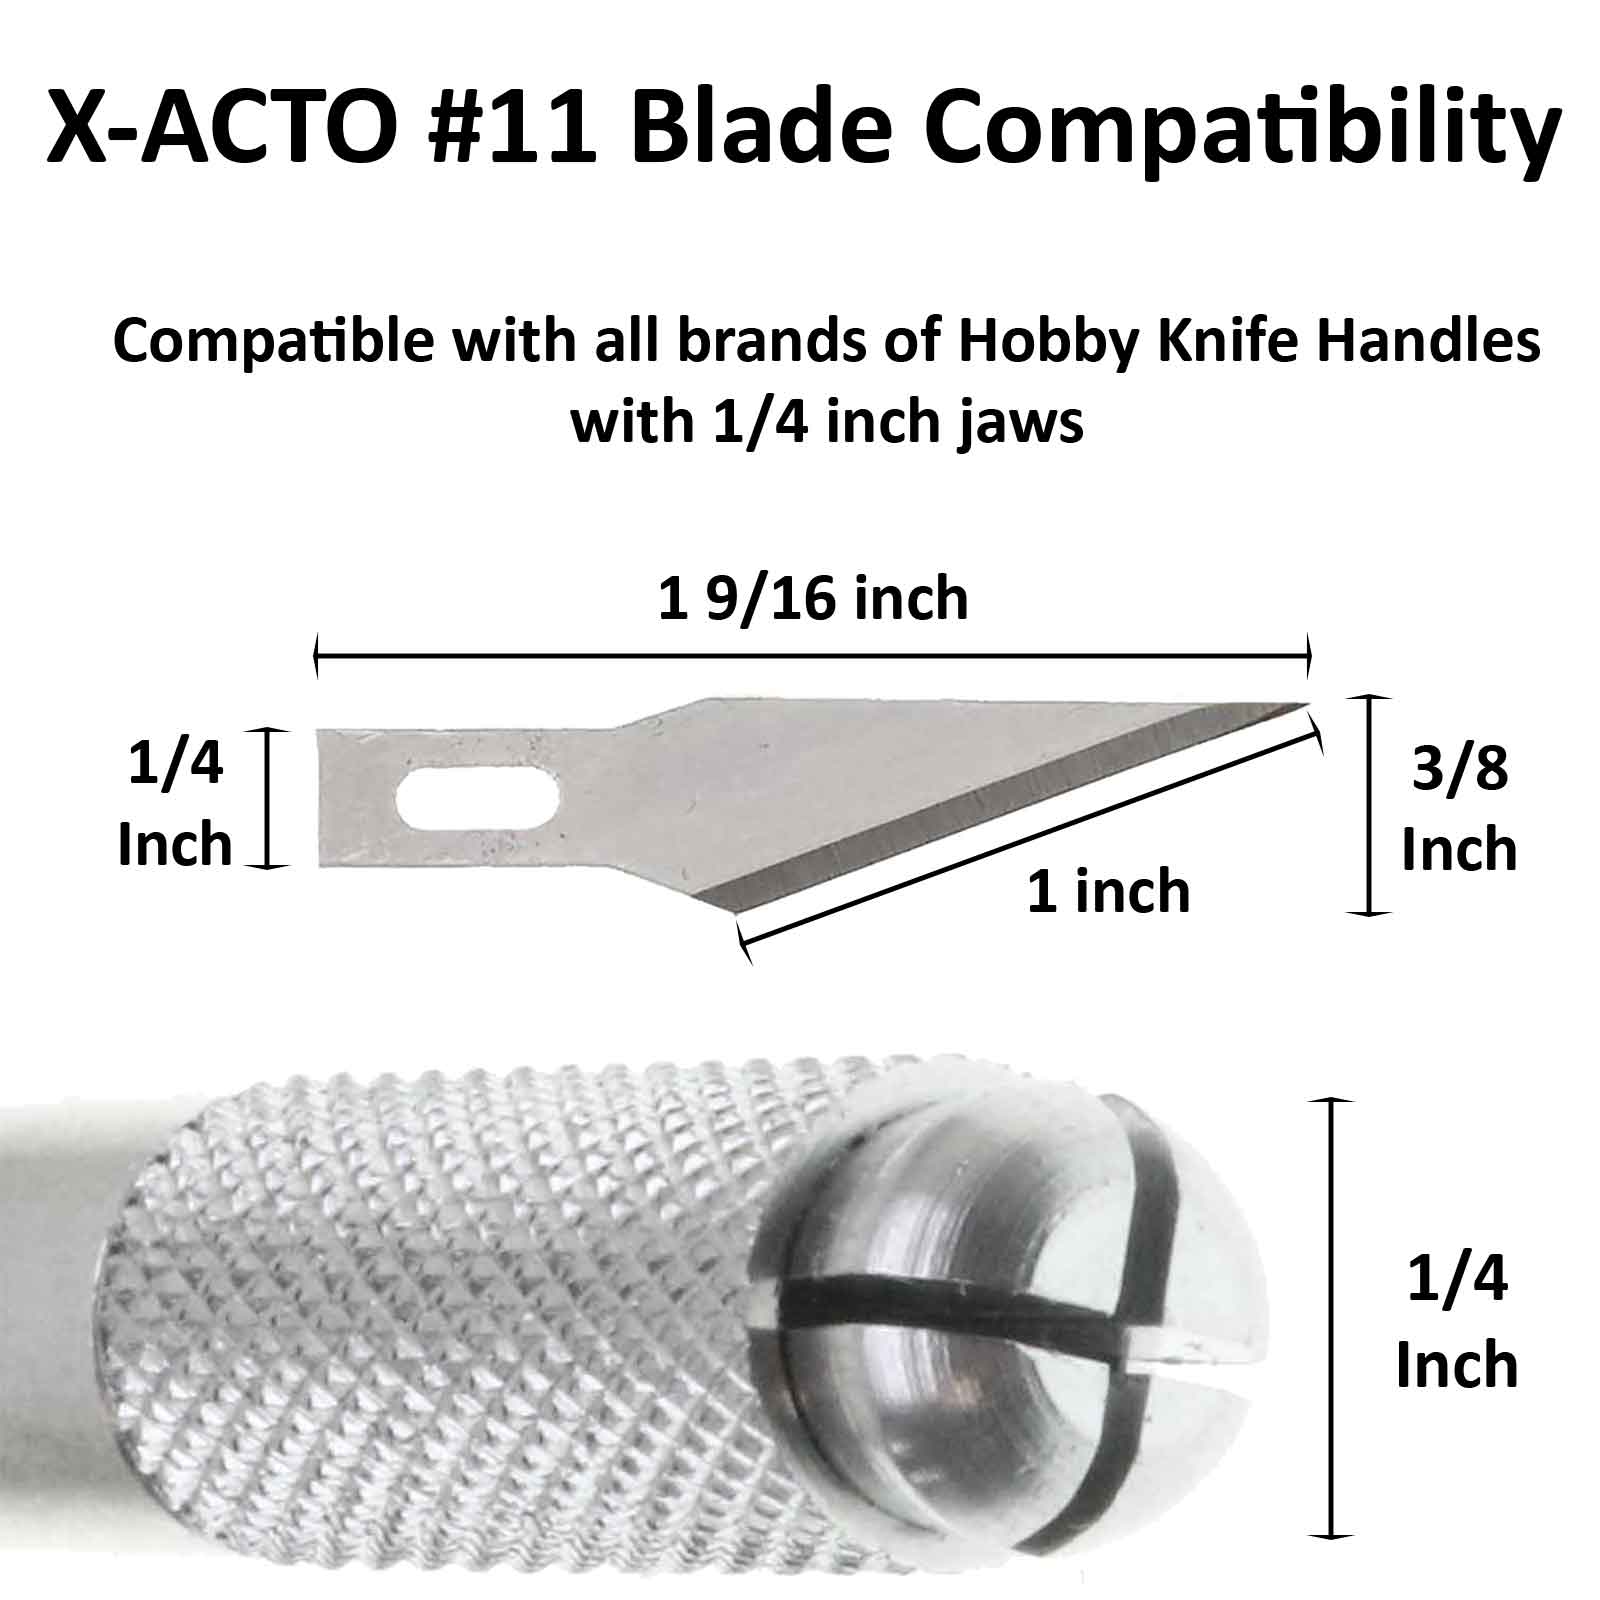 X-ACTO #11M X291M Broad Tip Knife Blades - 5pc